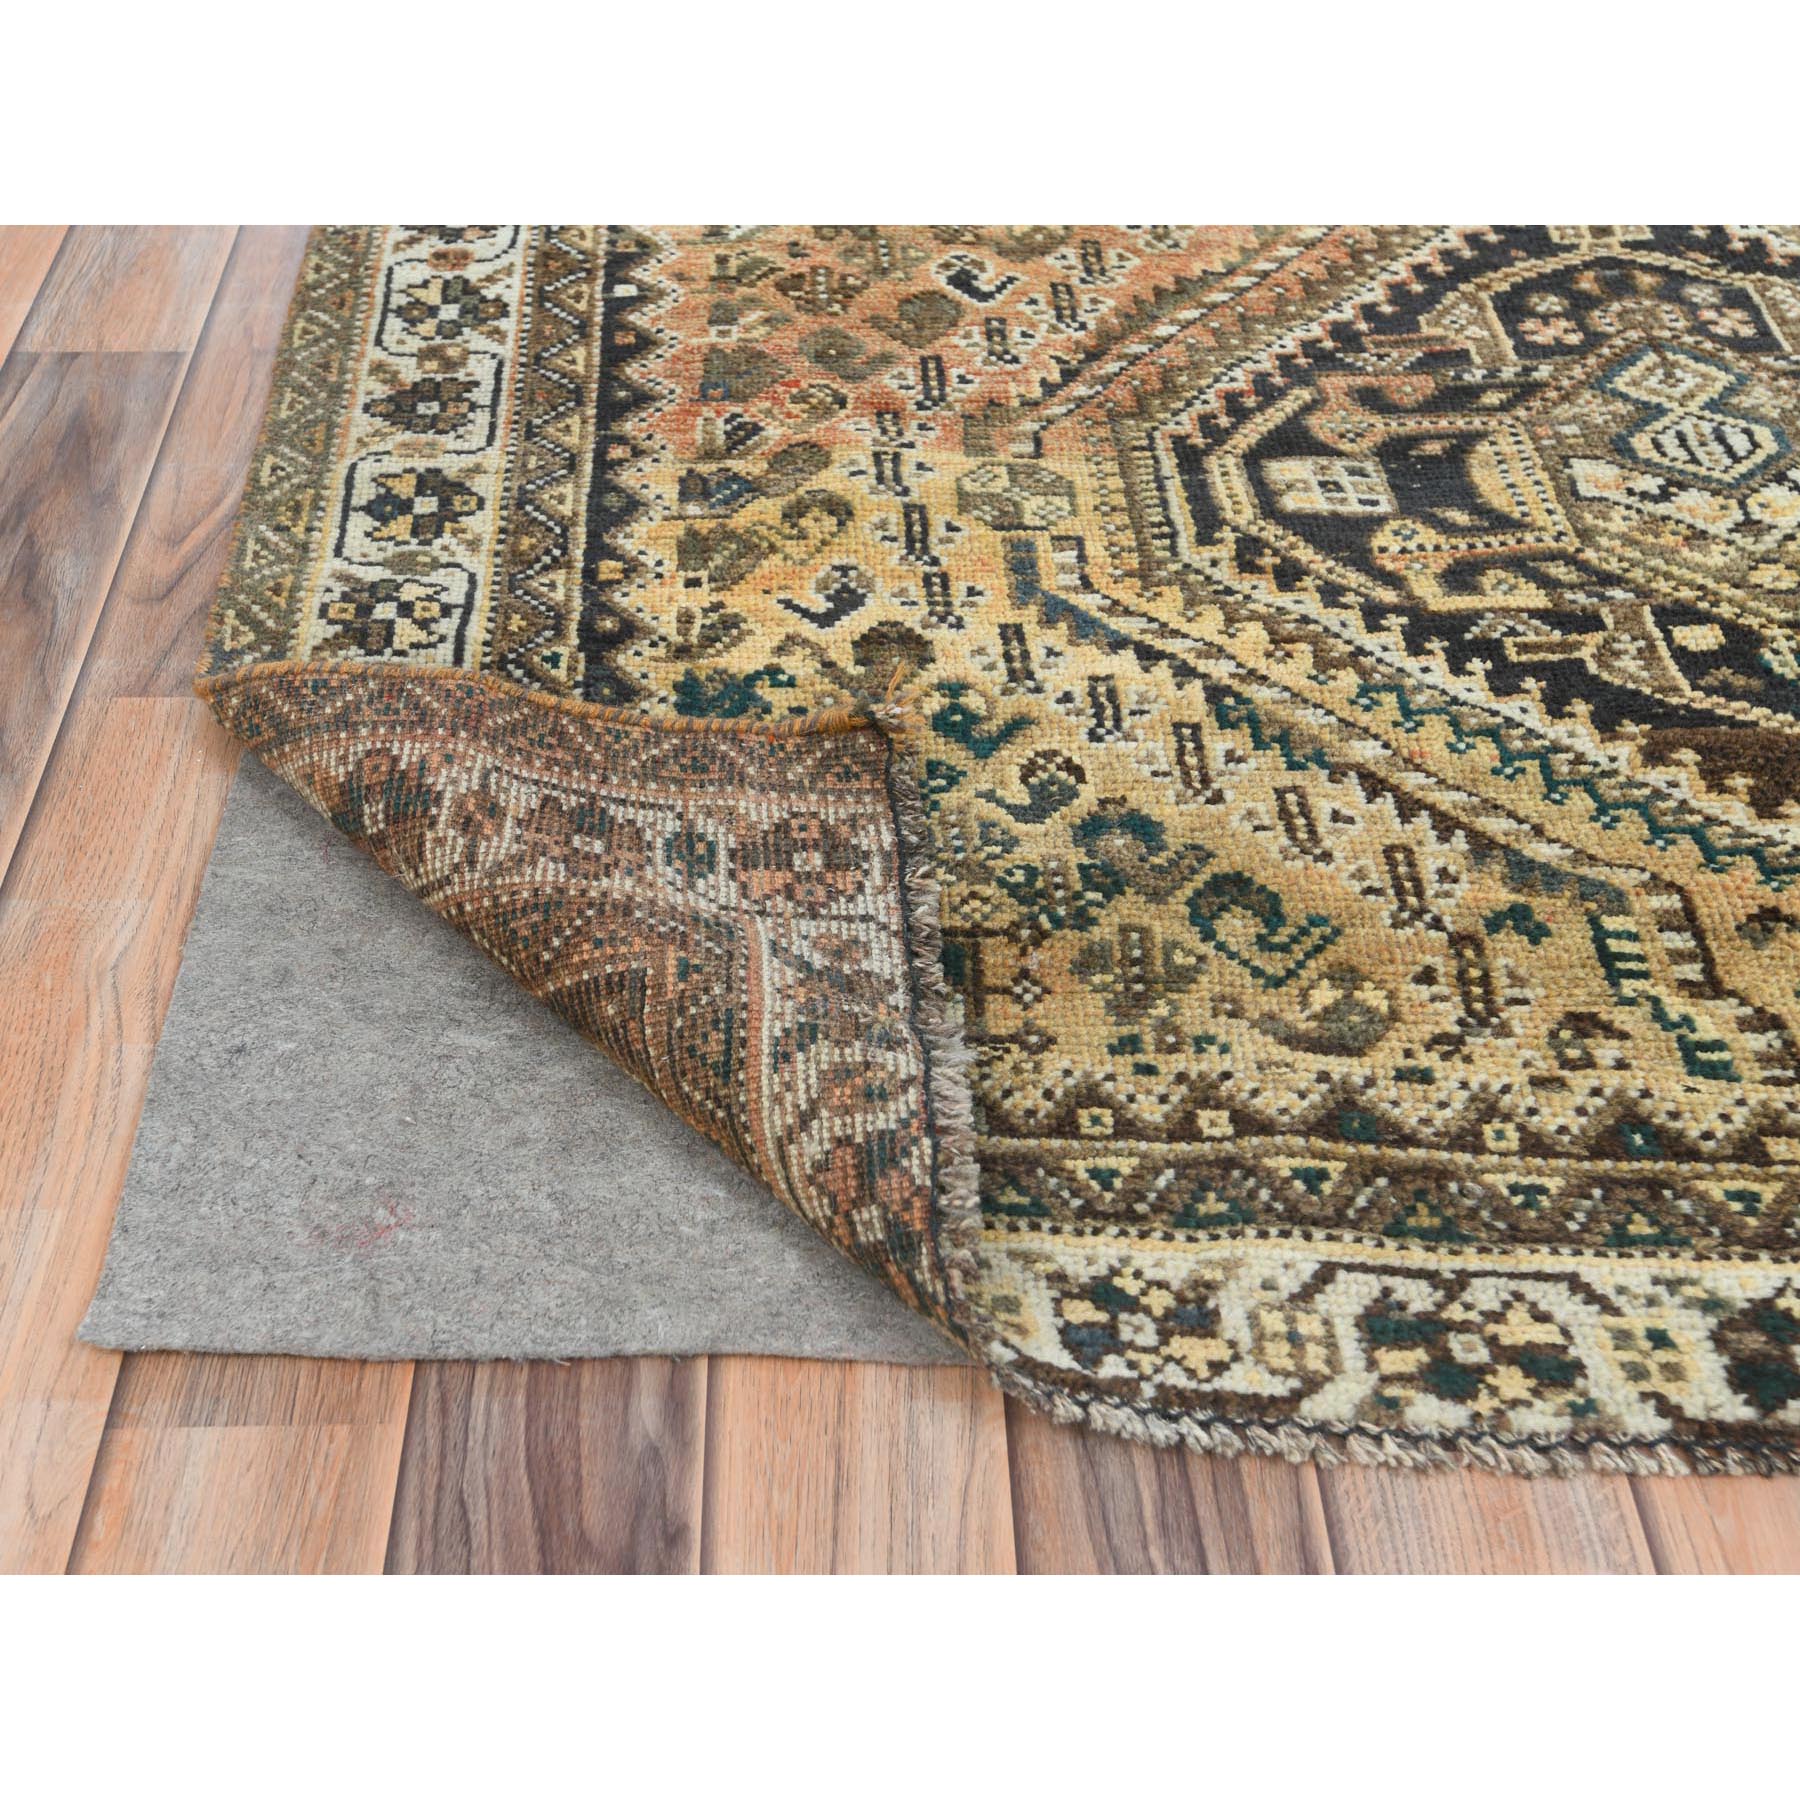 4'10"x6' Sand Color, Vintage Persian Shiraz with Geometric Medallion Design, Abrash, Hand Woven, Pure Wool, Distressed Look Cropped Thin Squarish Oriental Rug 